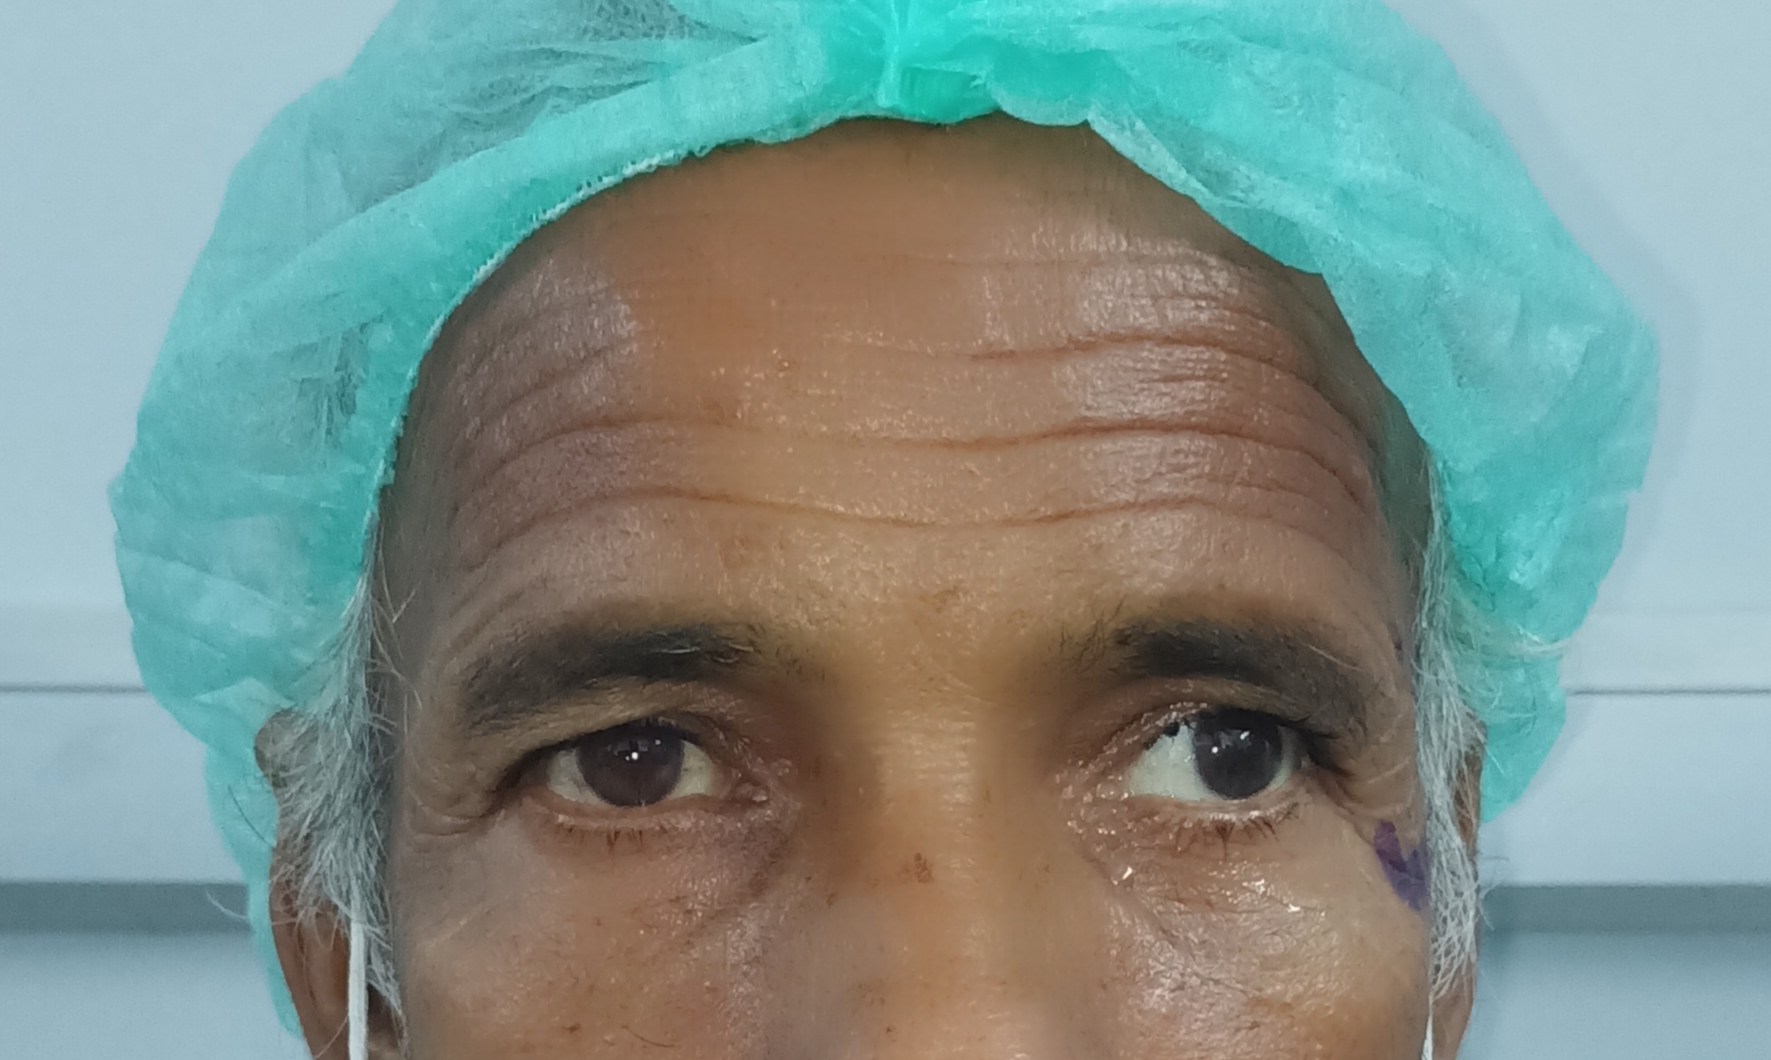 Image of  the patient depicting 20 degree exotropia along with 10 degree hypertropia in the left eye in primary gaze. Additionally, alternate cover test revealed right eye 20 degree exotropia with no vertical deviation suggestive of an alternate exotropia in both eyes with left eye dissociated vertical deviation